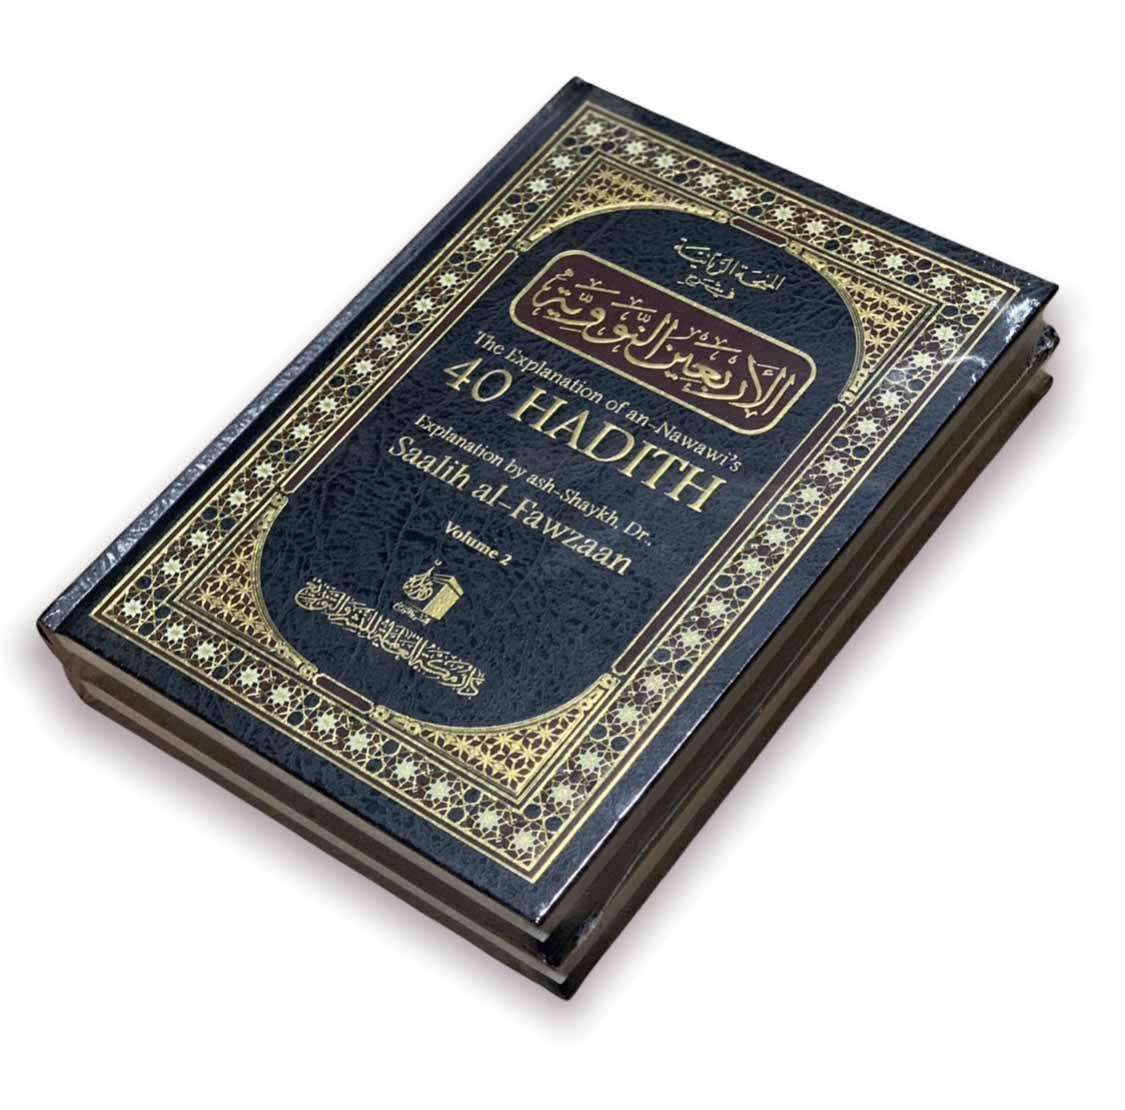 The Explanation Of An-Nawawi's 40 Hadith (2 Volume)